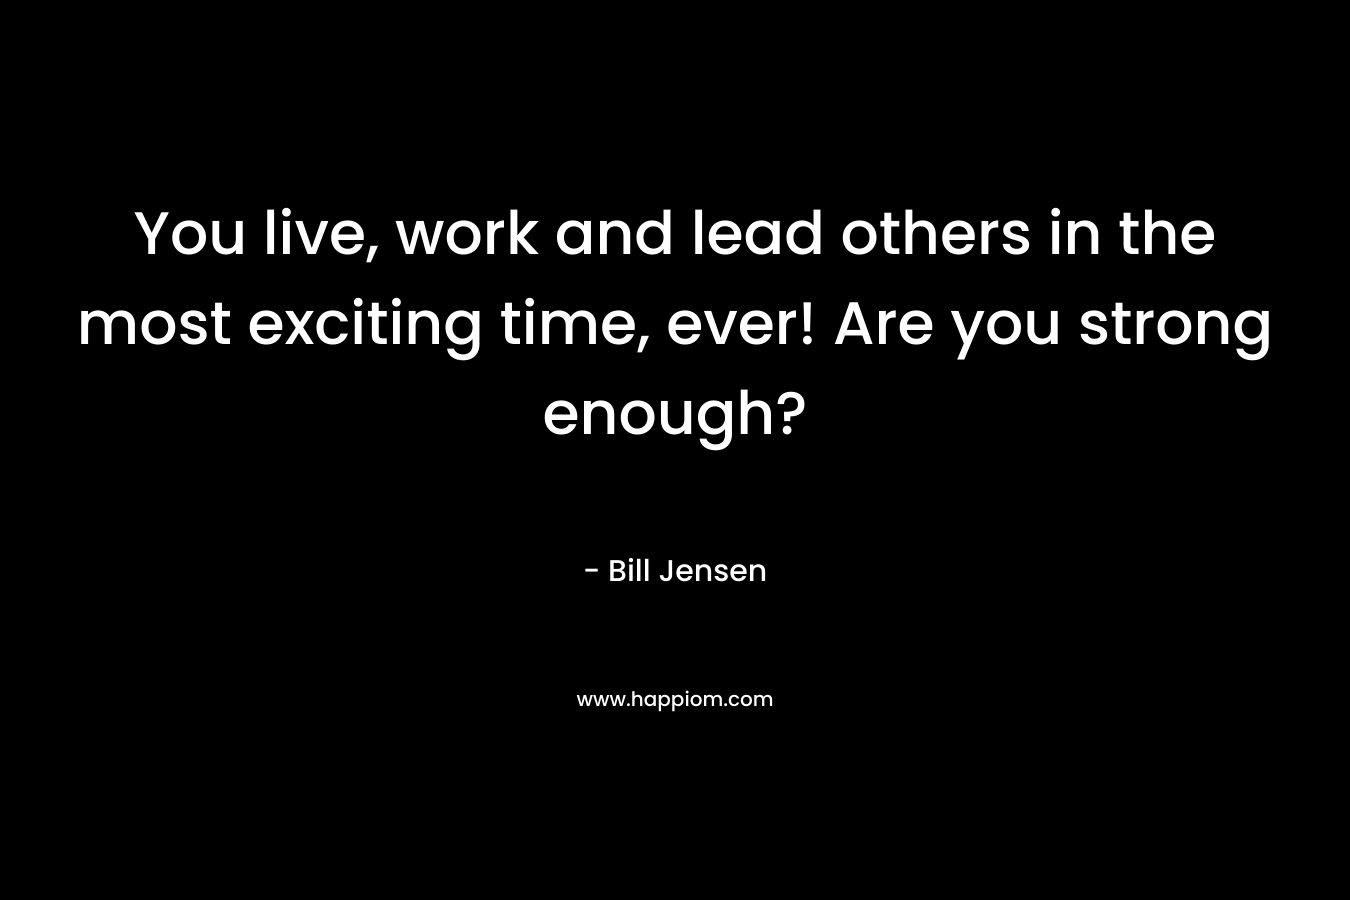 You live, work and lead others in the most exciting time, ever! Are you strong enough?